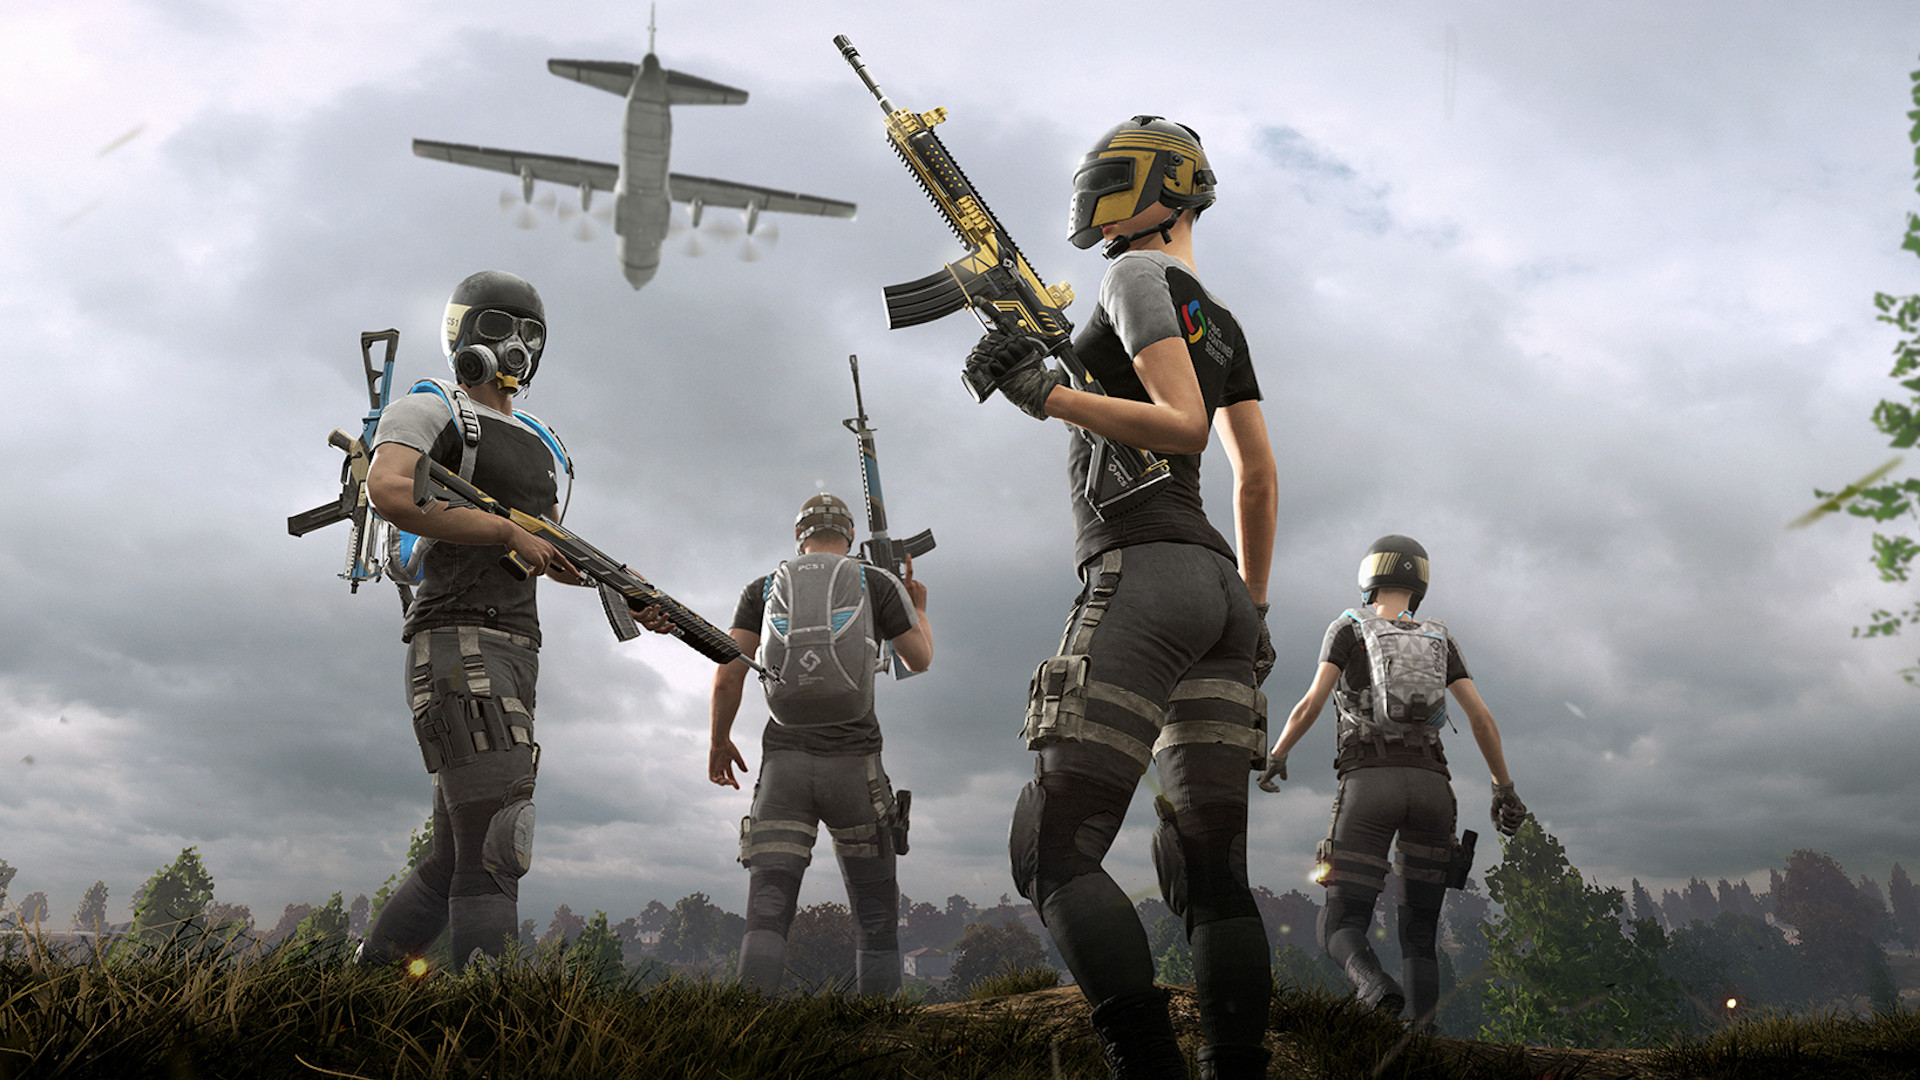 Pubg Players Will Wear Temperature Patches During 21 Global Invitational The Loadout